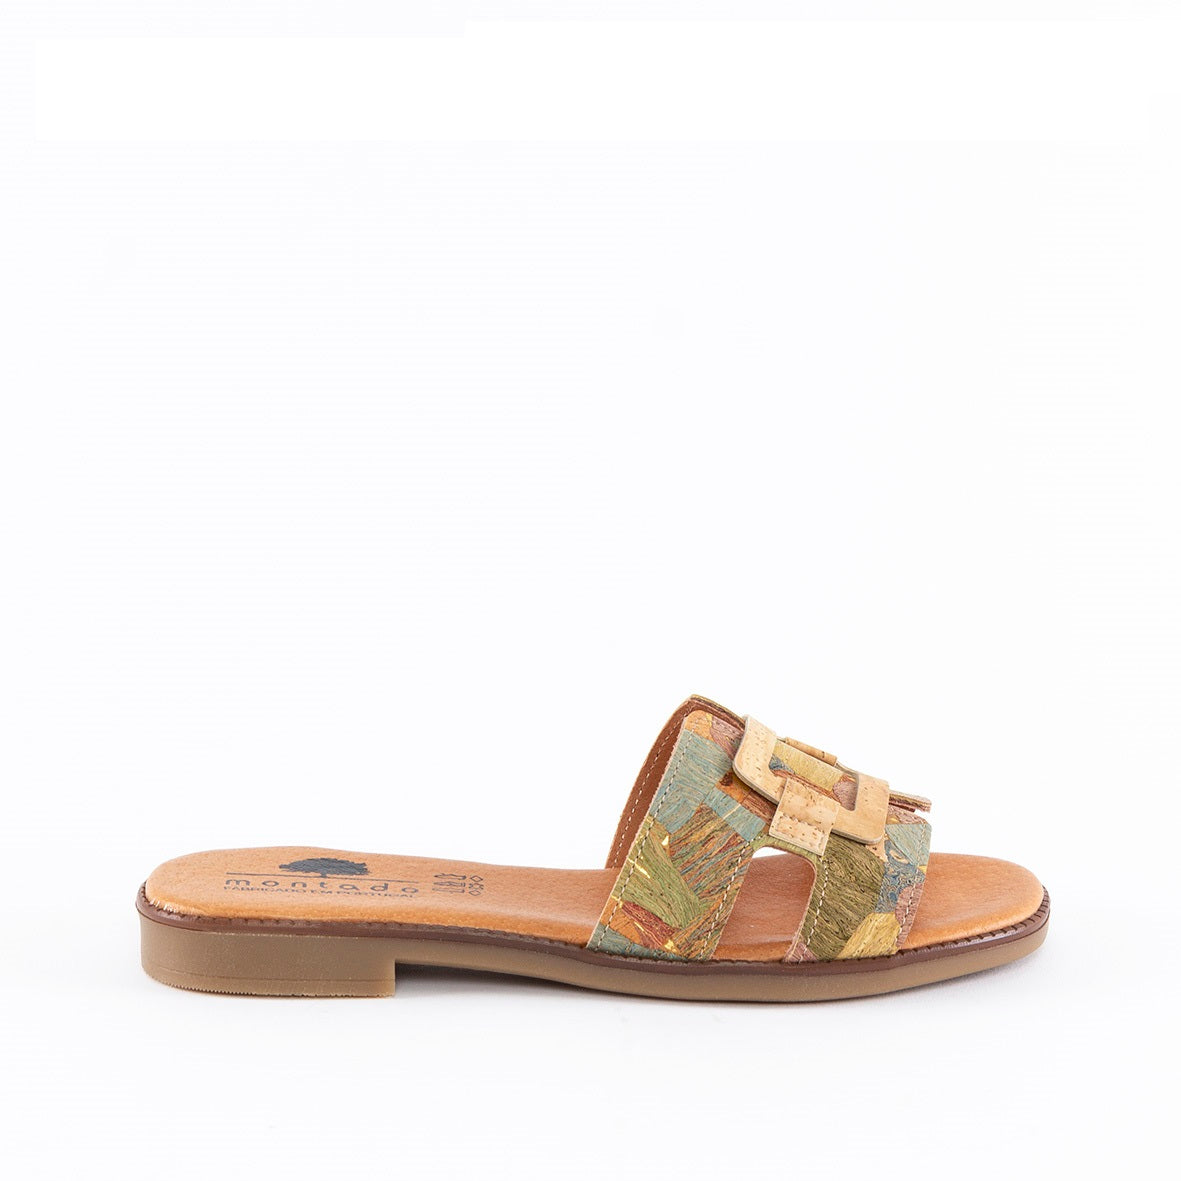 Cork Sandals Square - Low Heel | Cork Shoes | Made in Portugal | Summer